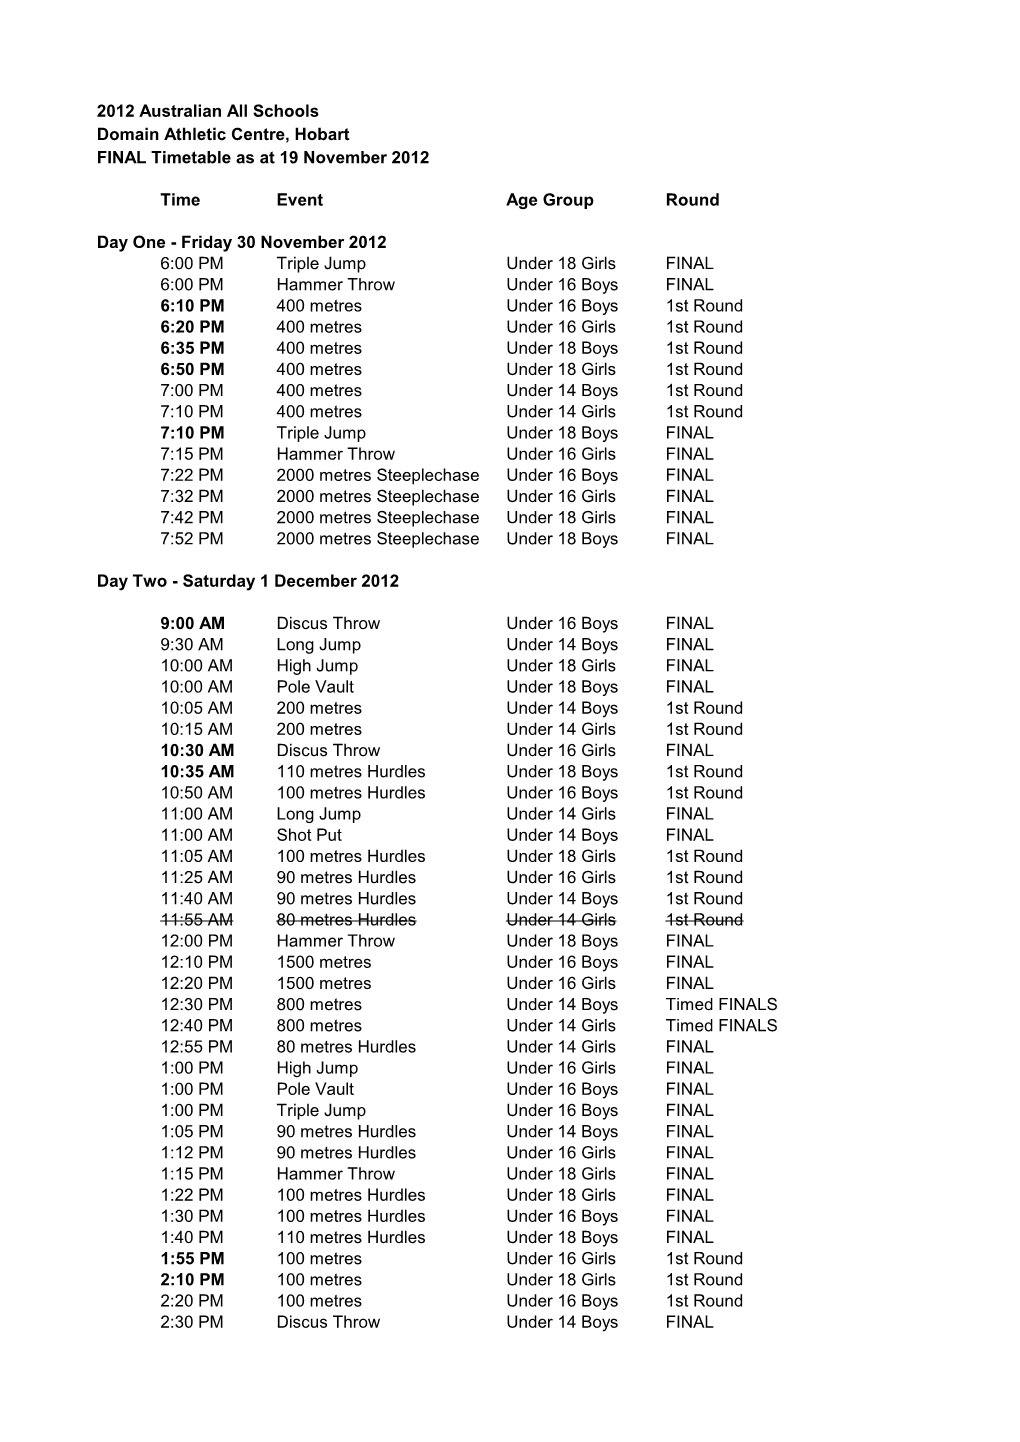 2012 Australian All Schools Domain Athletic Centre, Hobart FINAL Timetable As at 19 November 2012